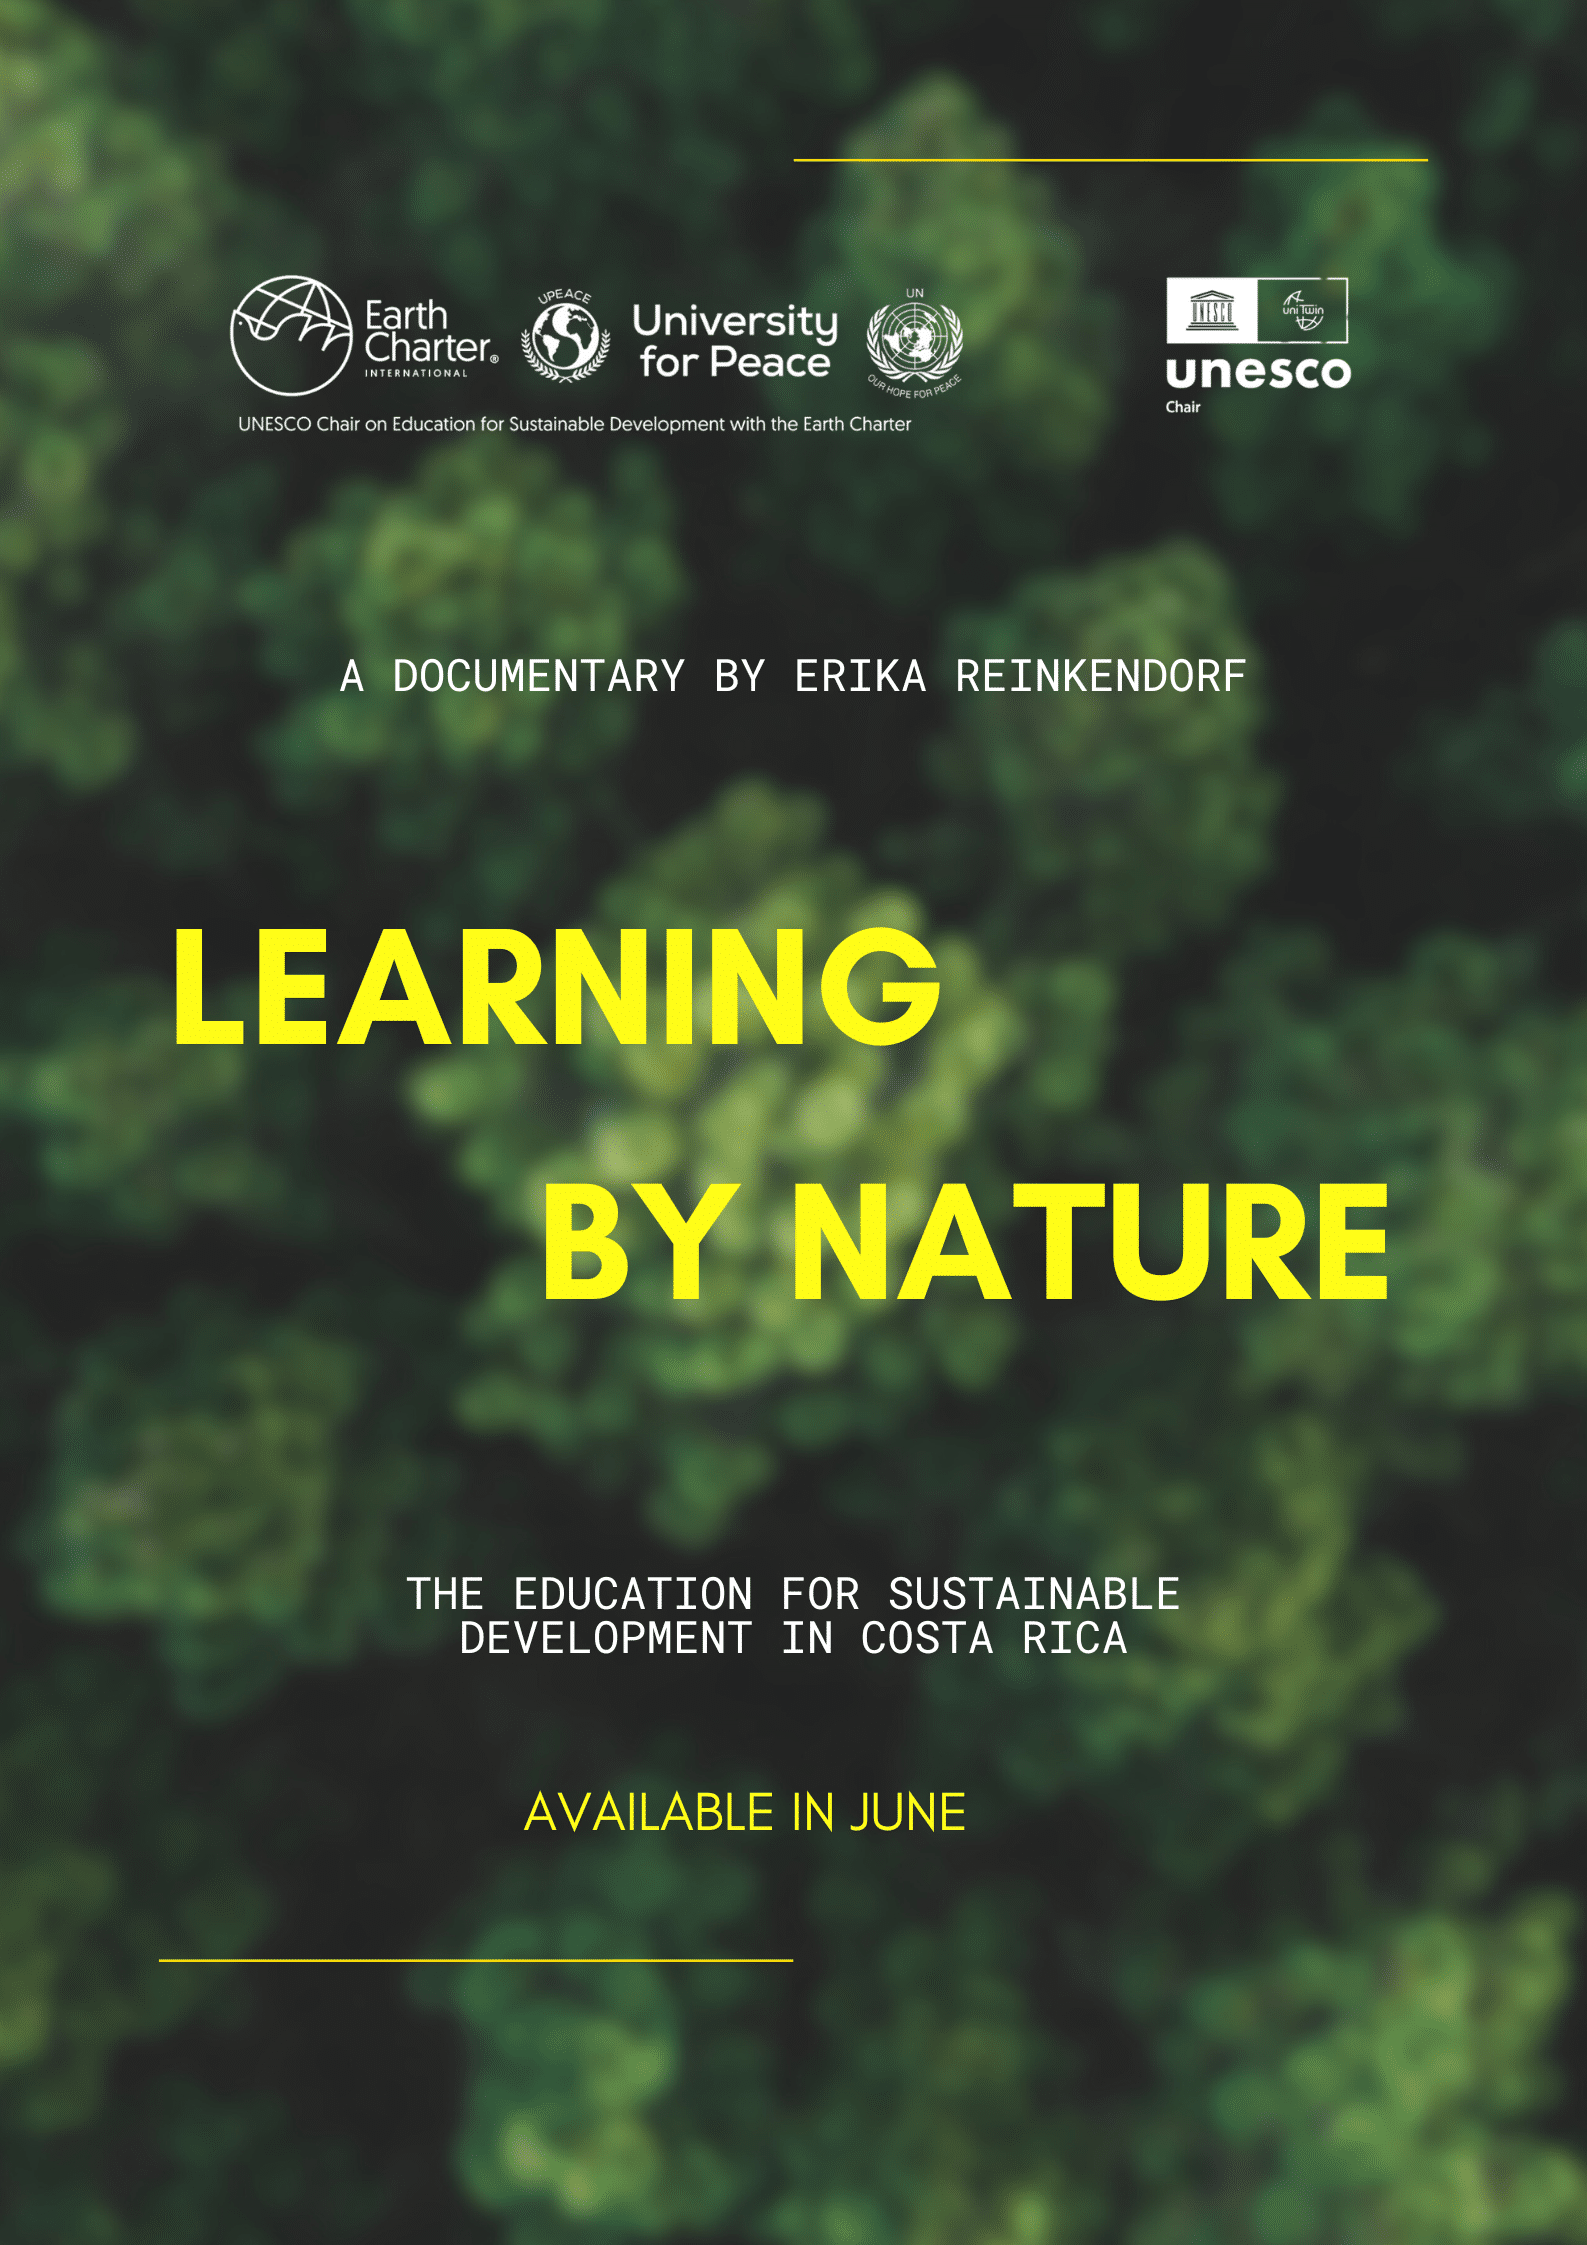 Launching of the Documentary “Learning by Nature” at the Humboldt School    